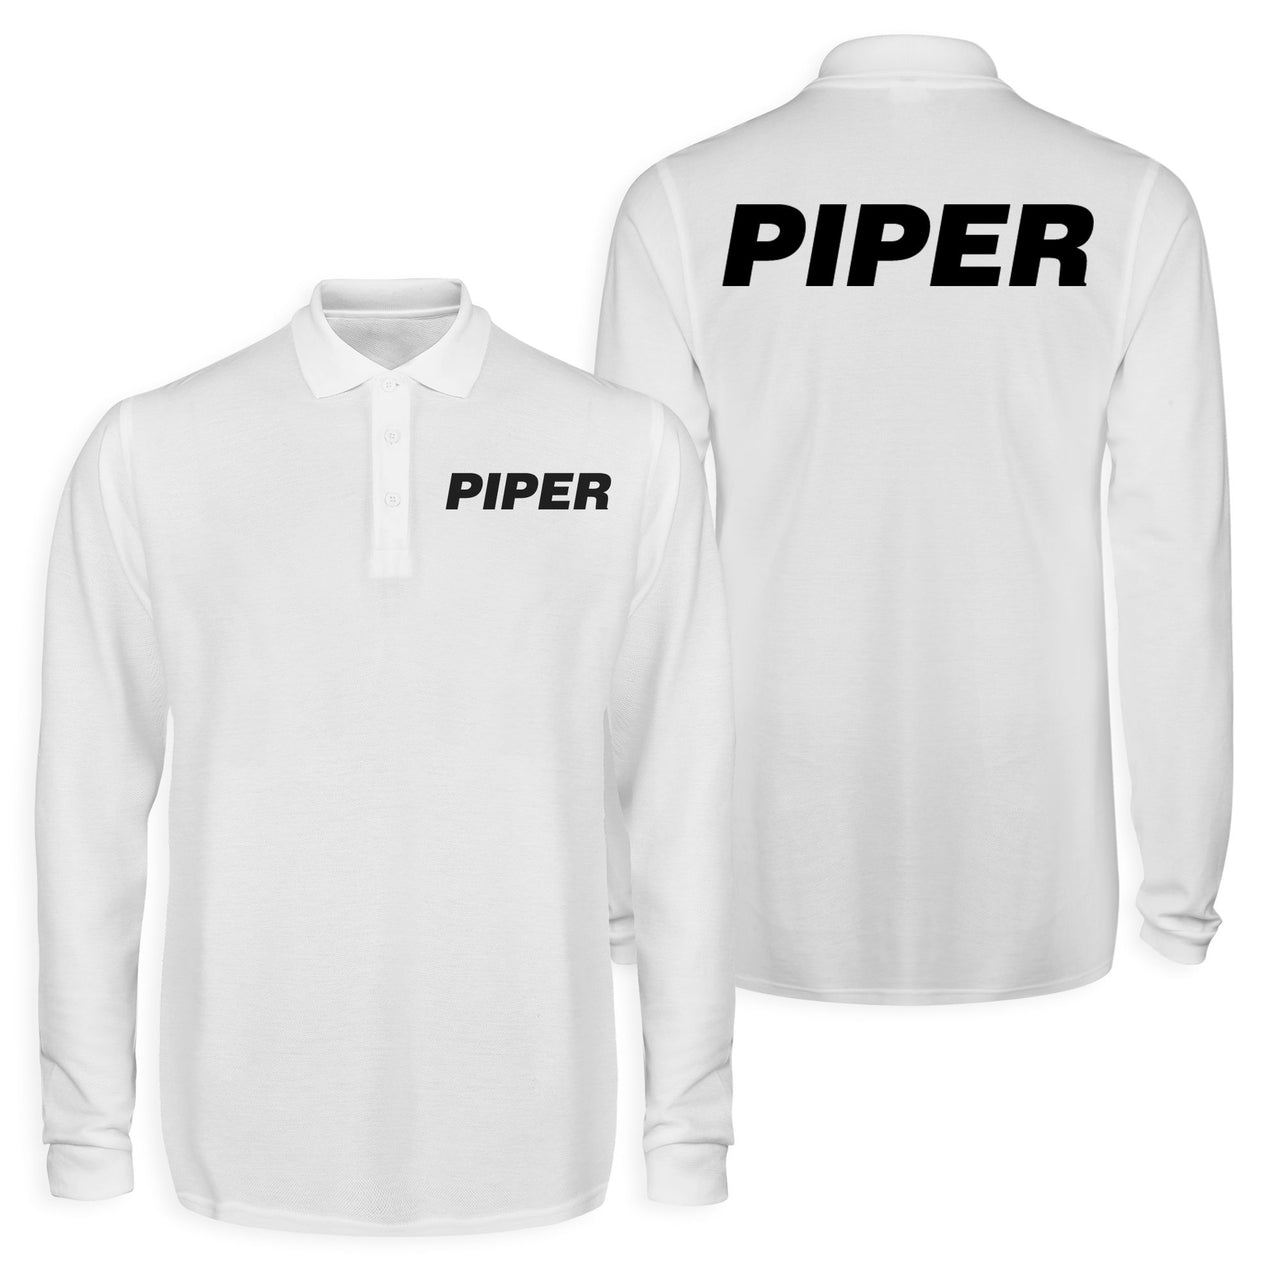 Piper & Text Designed Long Sleeve Polo T-Shirts (Double-Side)